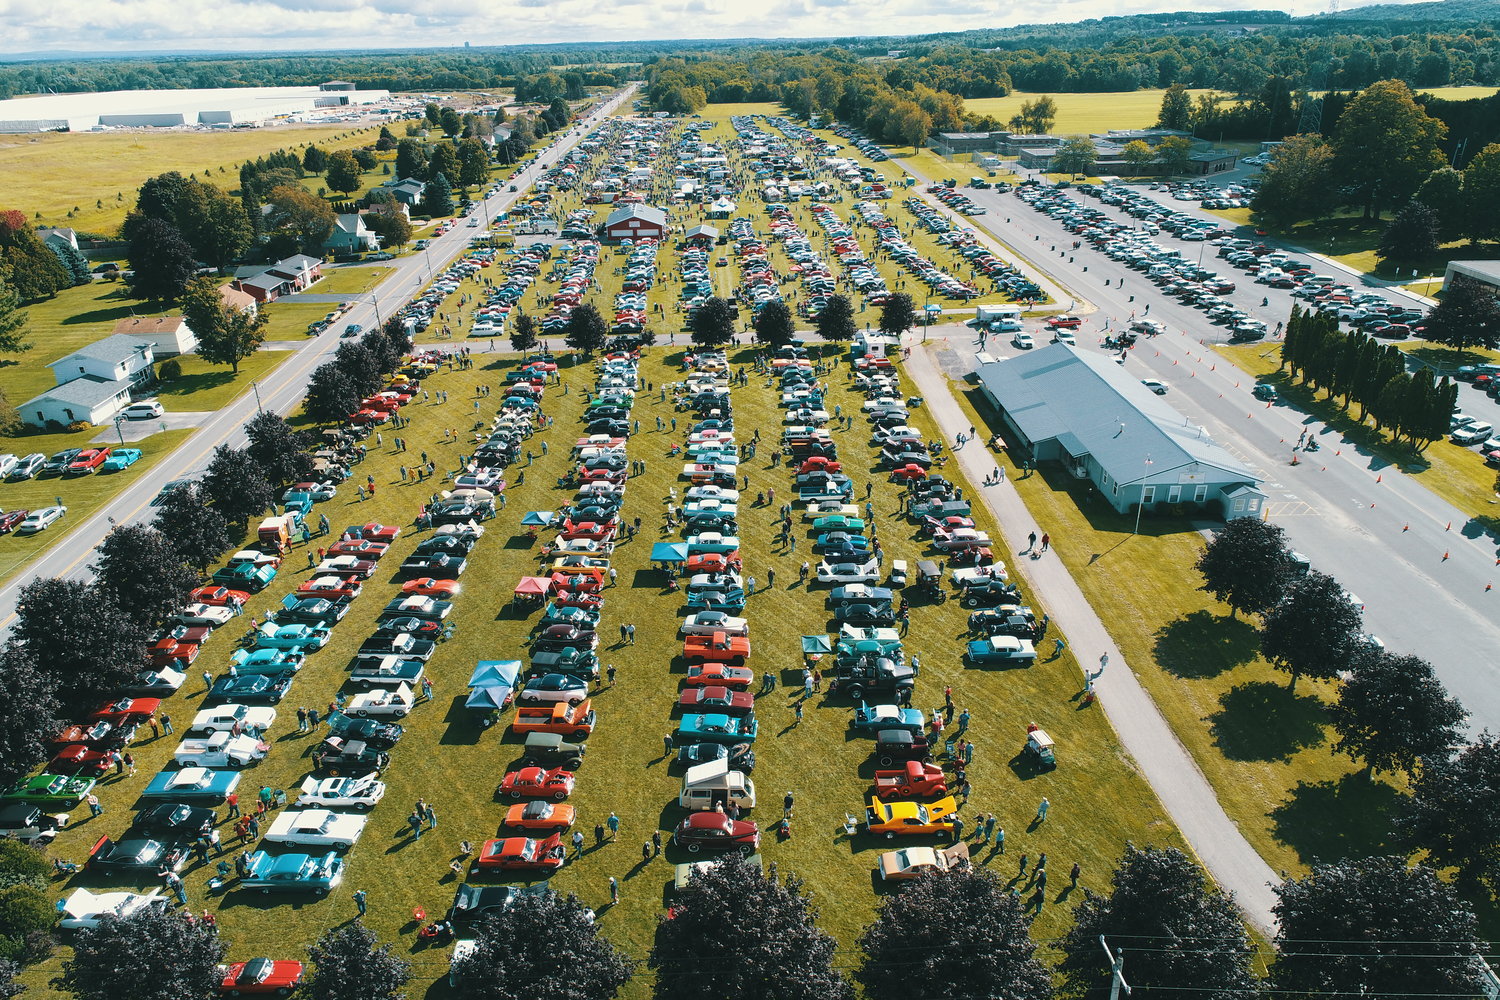 The Mohican Model A Ford Club will hold its 61st annual Antique Car Show and Flea Market at the Wampsville Firemen’s Field on Sunday, Sept. 11.